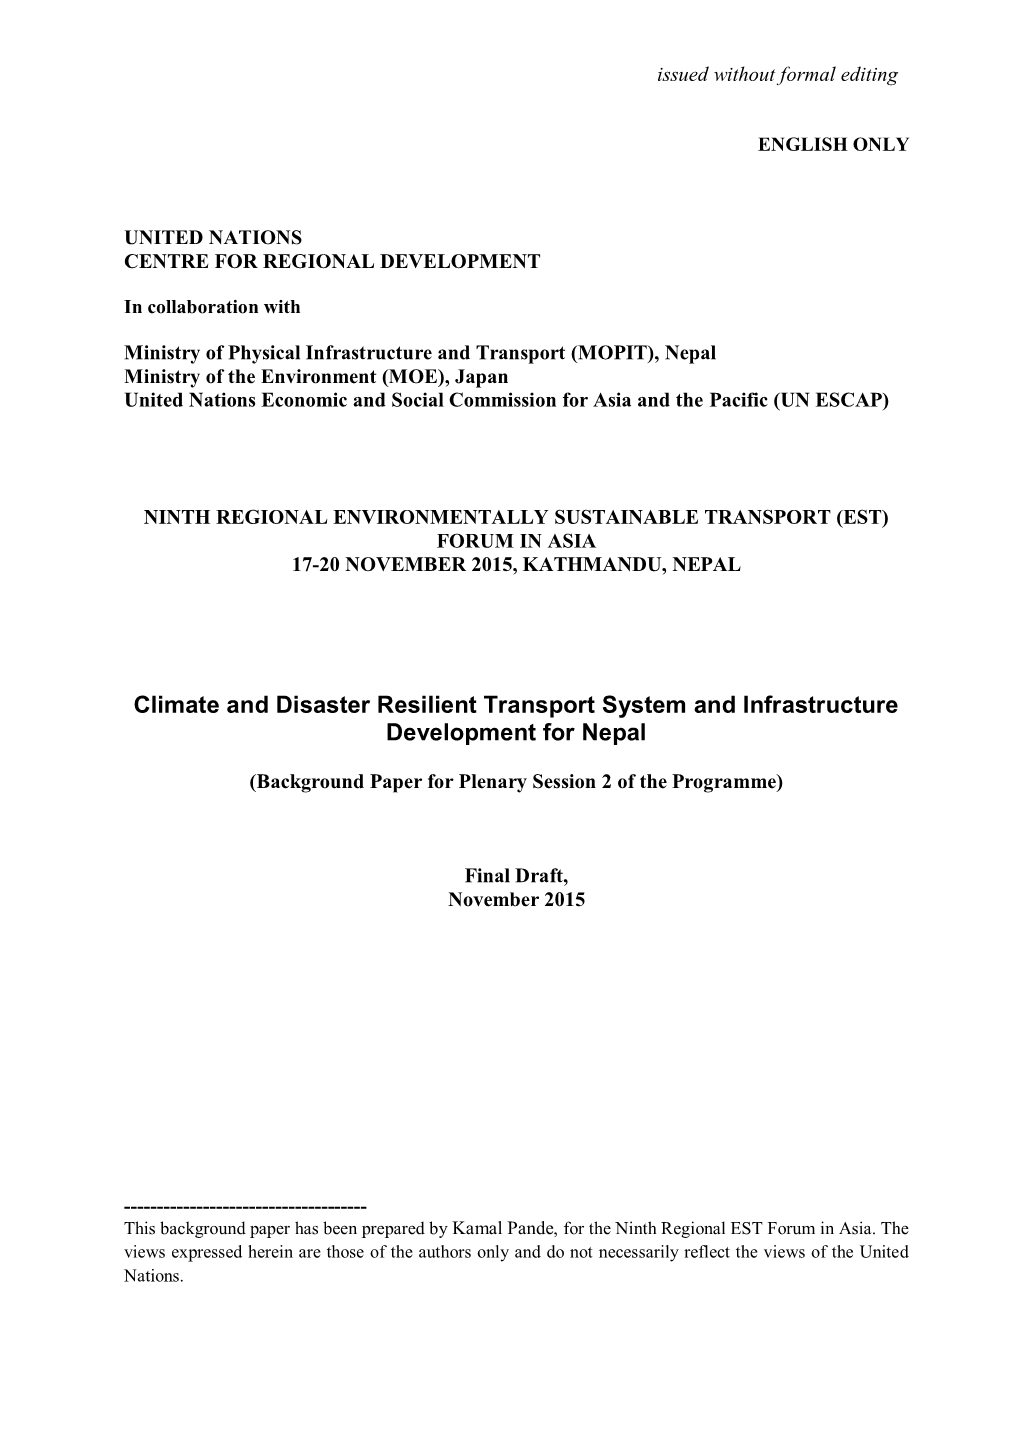 Climate and Disaster Resilient Transport System and Infrastructure Development for Nepal